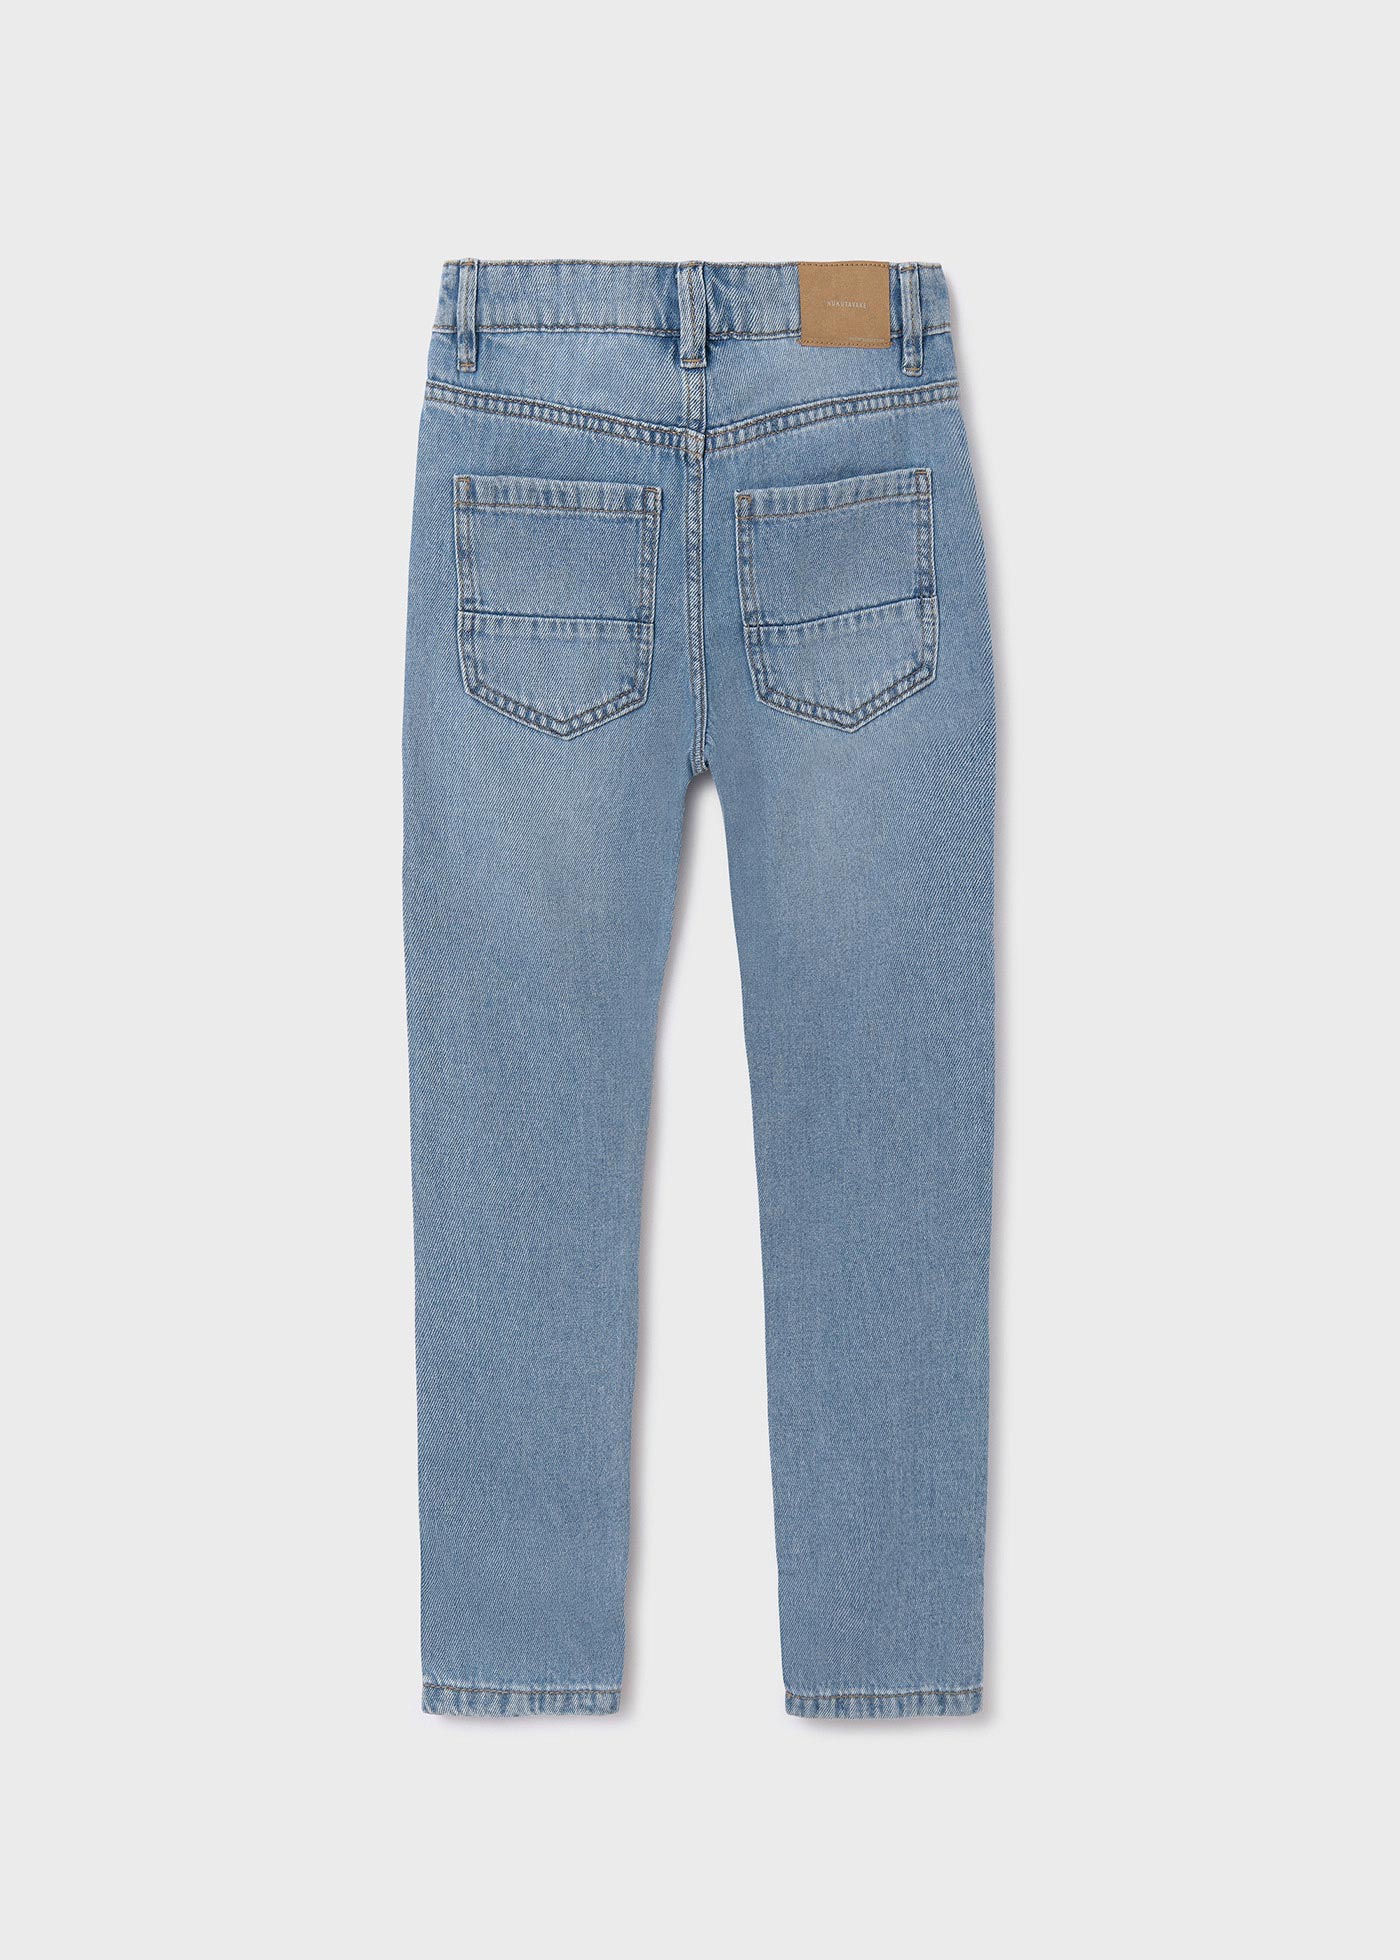 Boys jeans straight fit Better Cotton